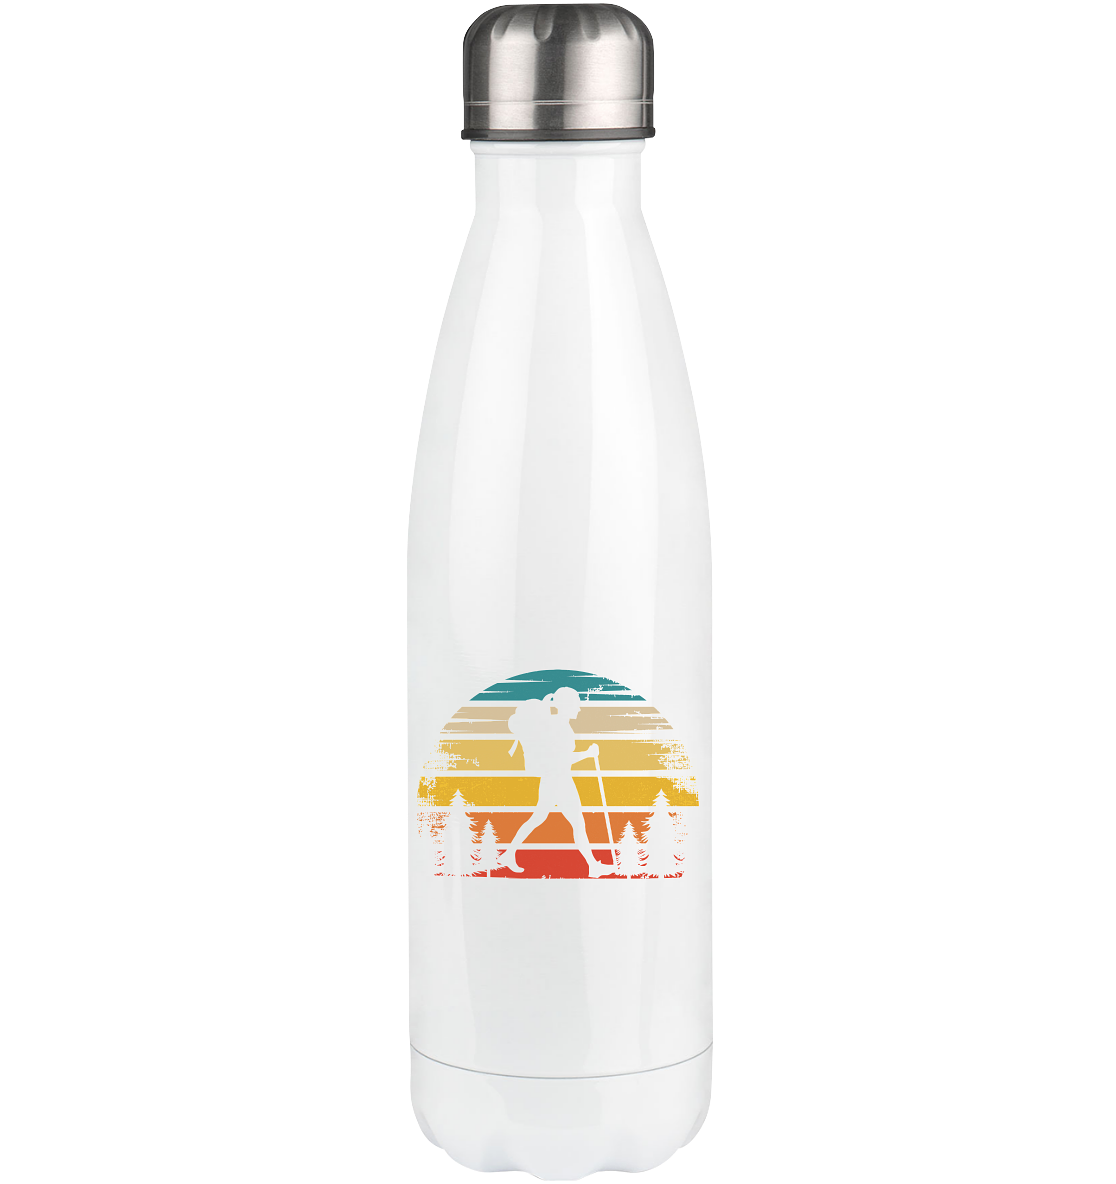 Retro Sun and Hiking - Edelstahl Thermosflasche wandern 500ml